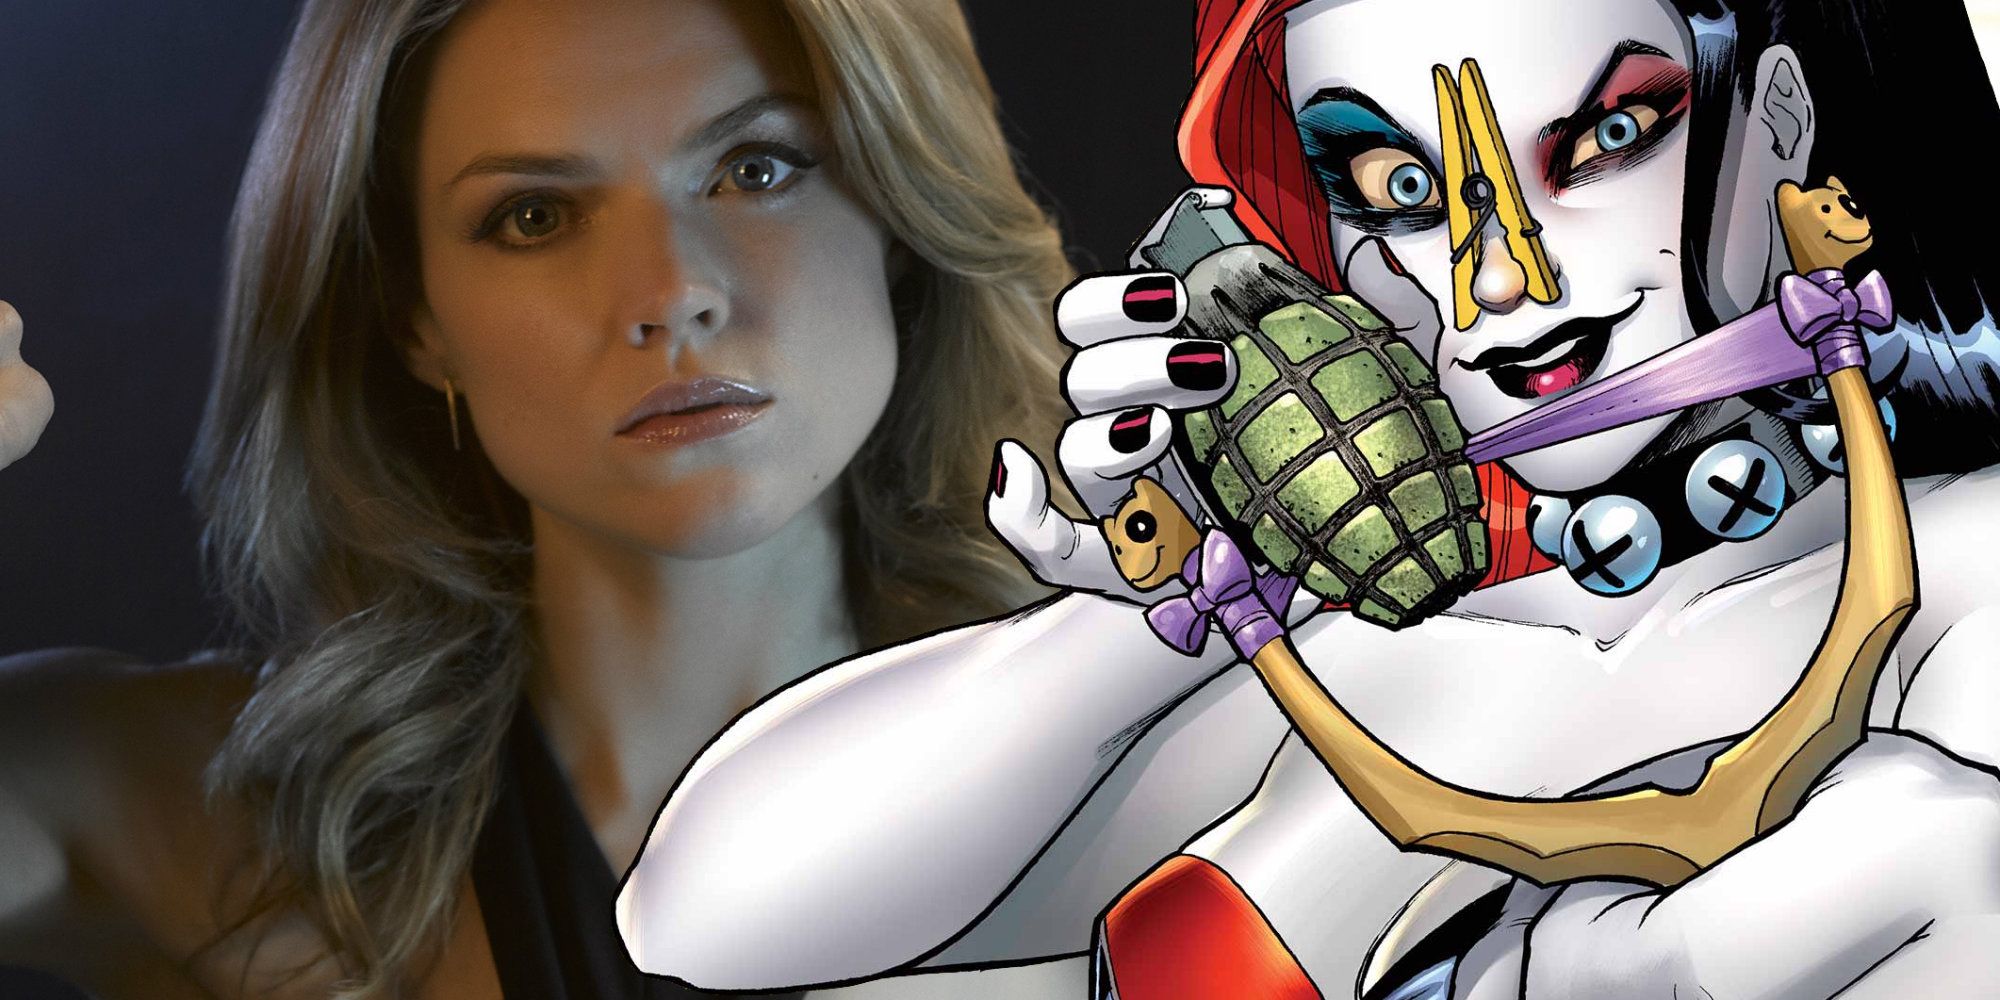 Who is Gotham's Harley Quinn?